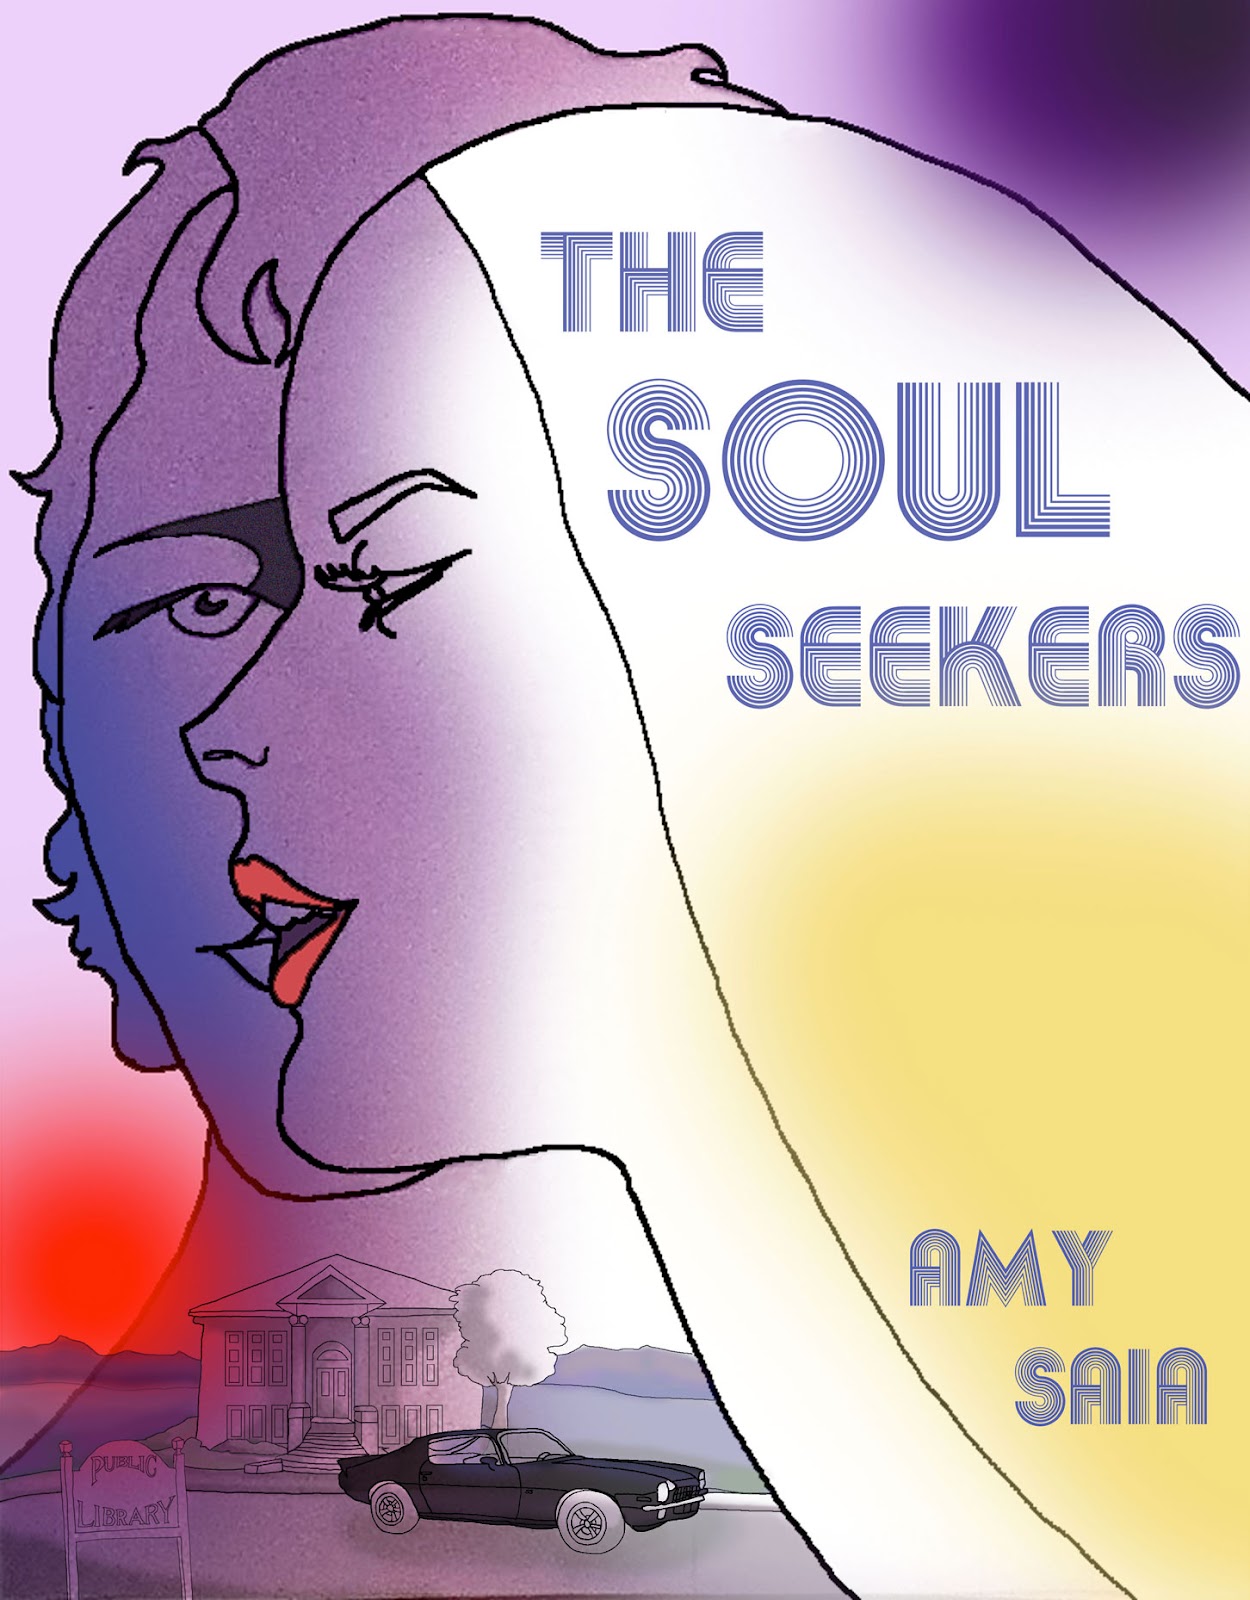 Follow The Muse Cover And Release Date Announcement The Soul Seekers